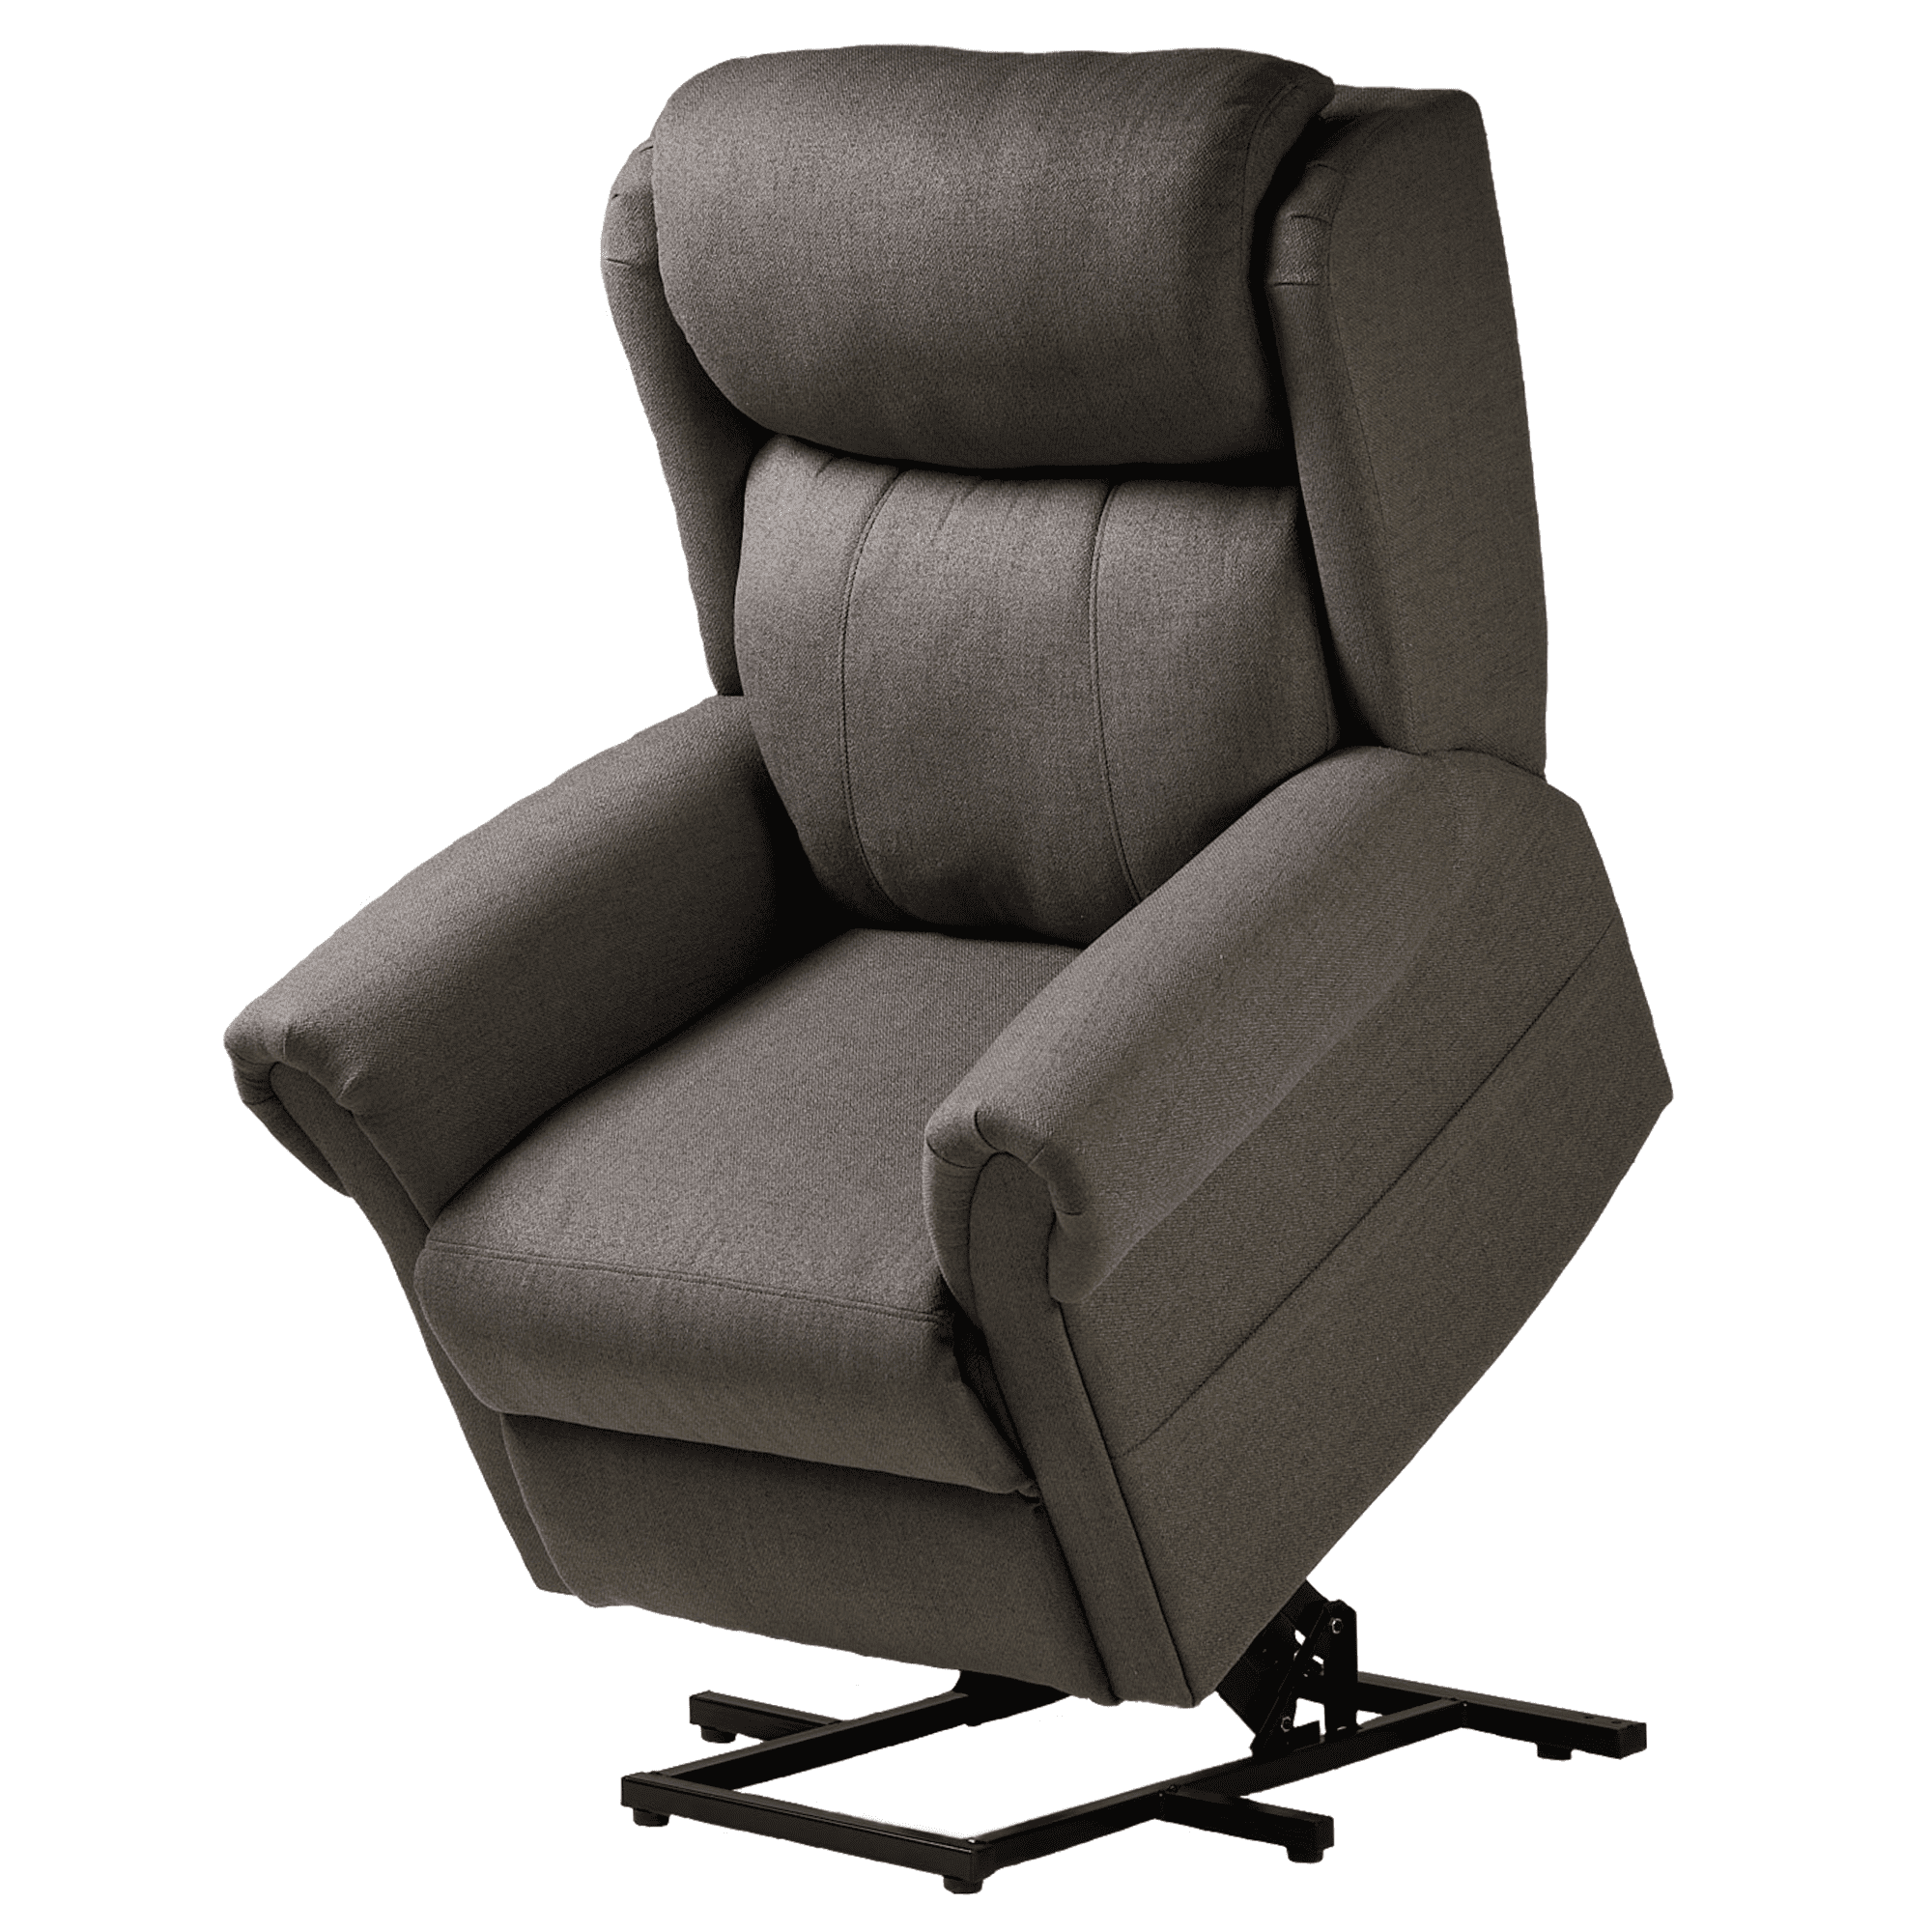 a grey reclining chair with a black base.